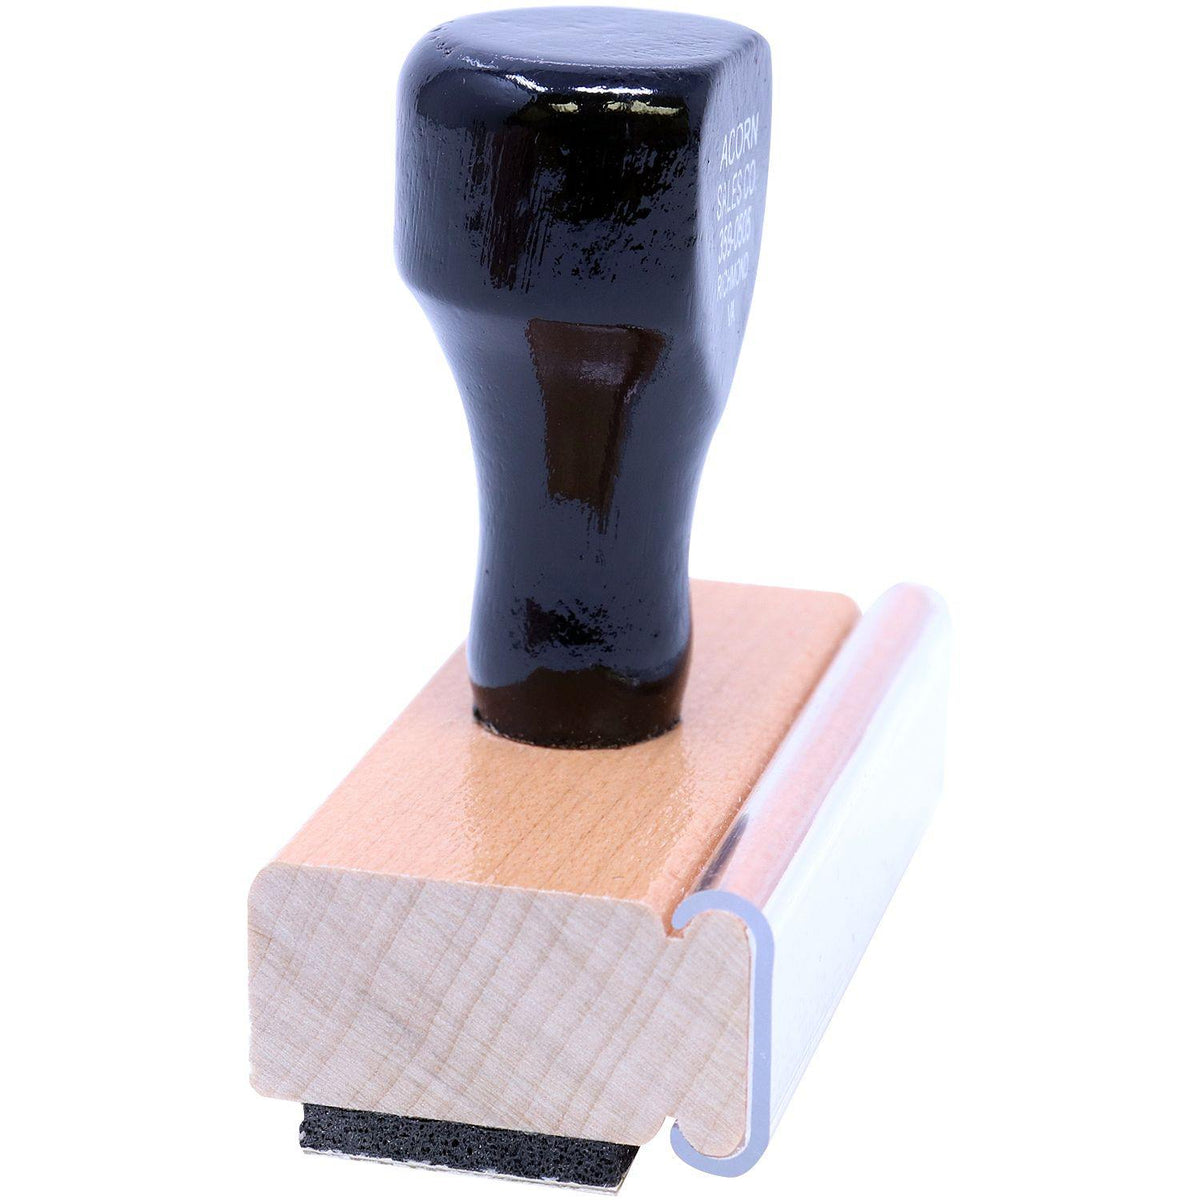 Side View of 100 Percent Rubber Stamp at an Angle